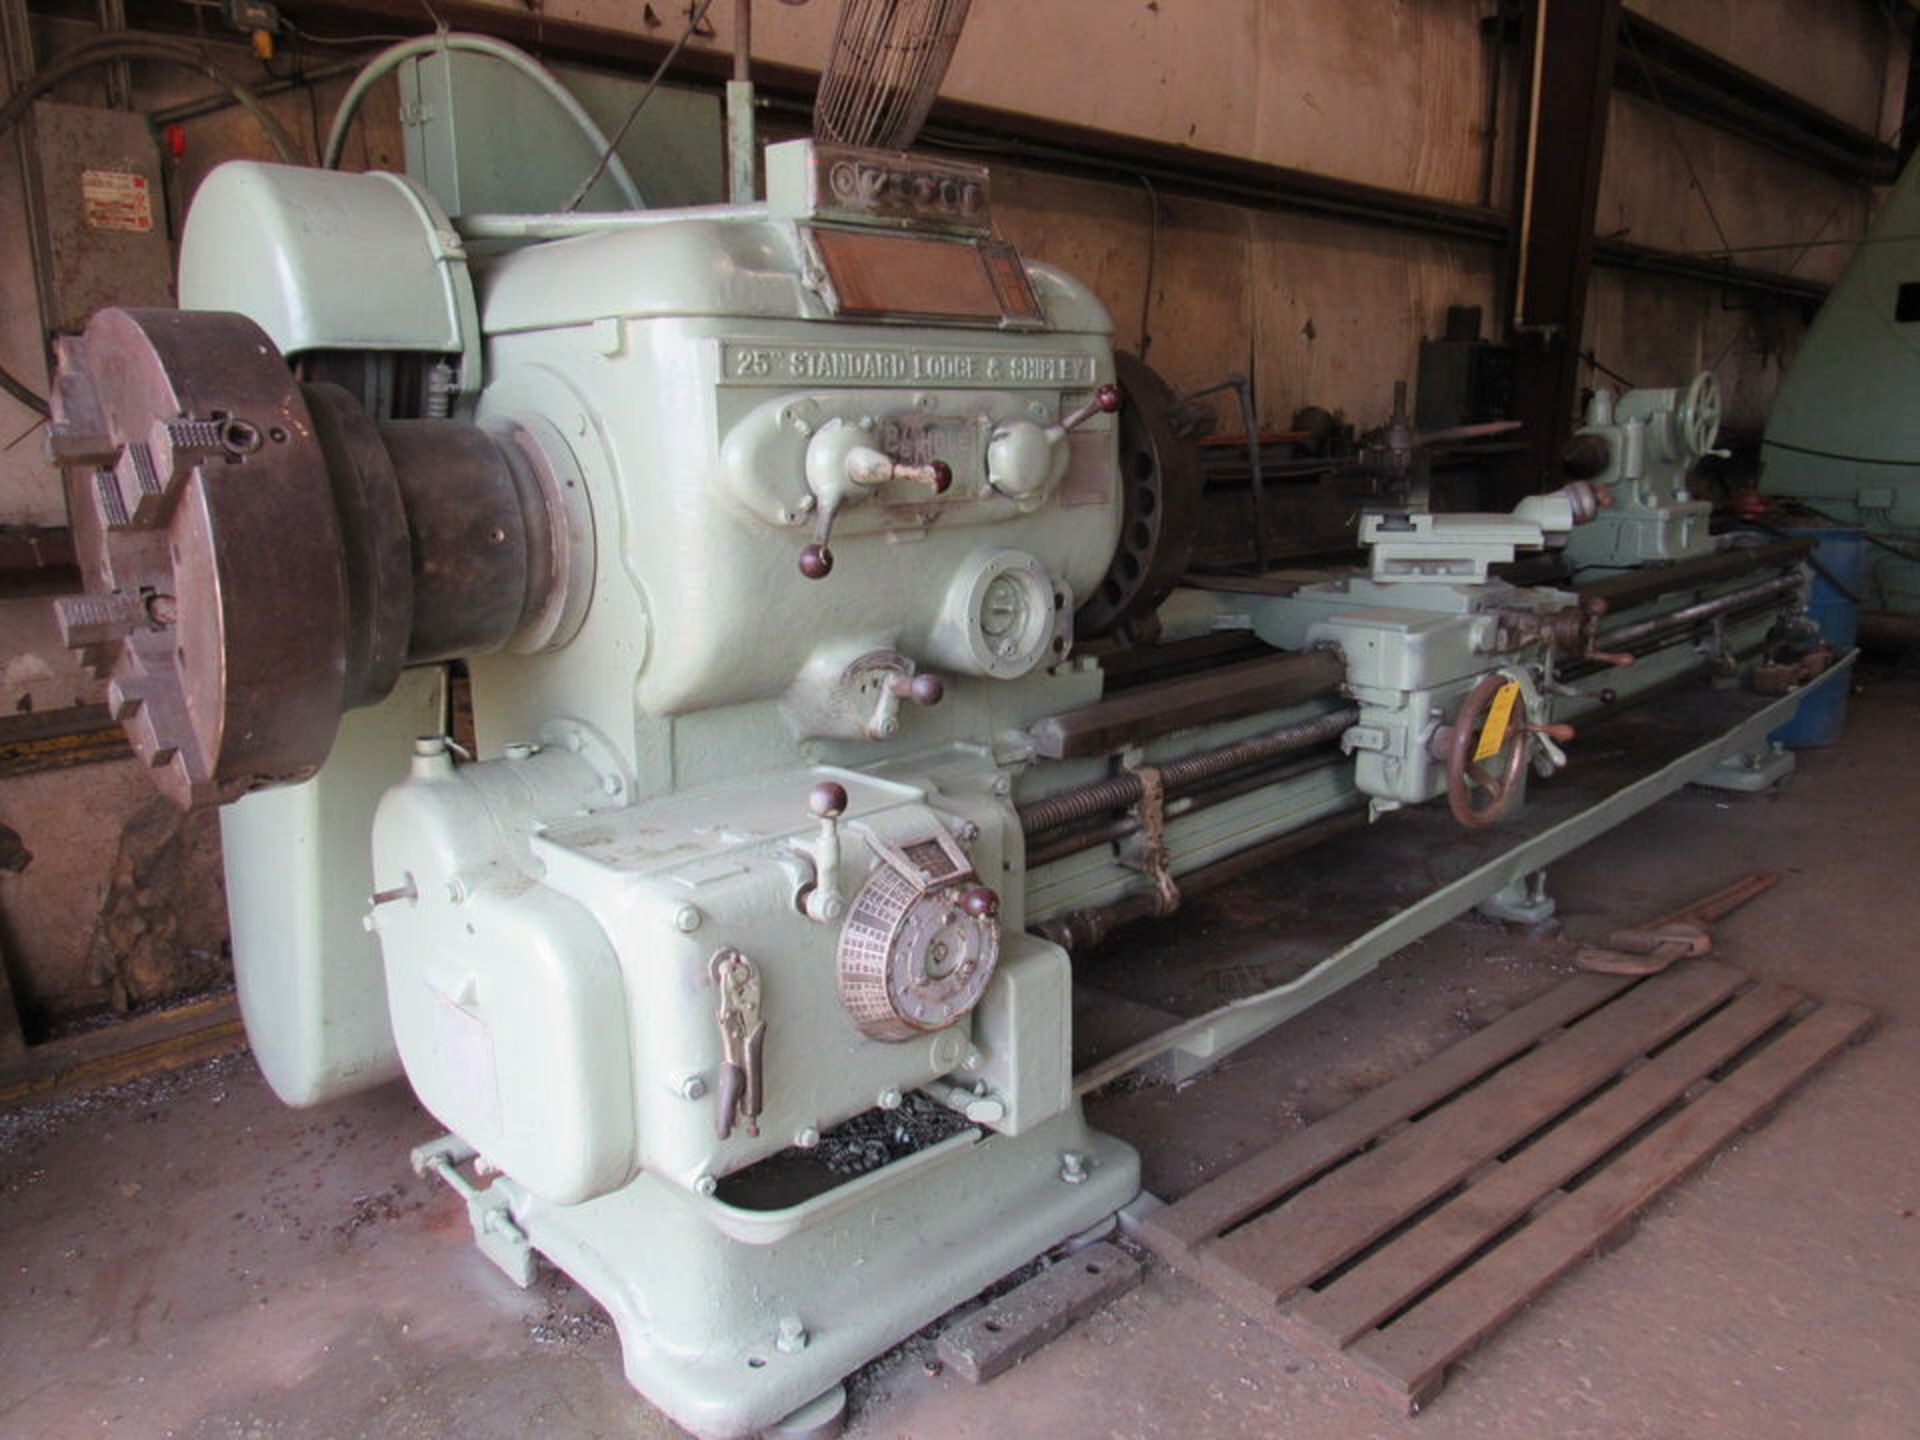 Lodge & Shipley 25" Standard Engine Lathe, 24" swing, 144" bed length, 21" 4-jaw front and rear - Image 3 of 14